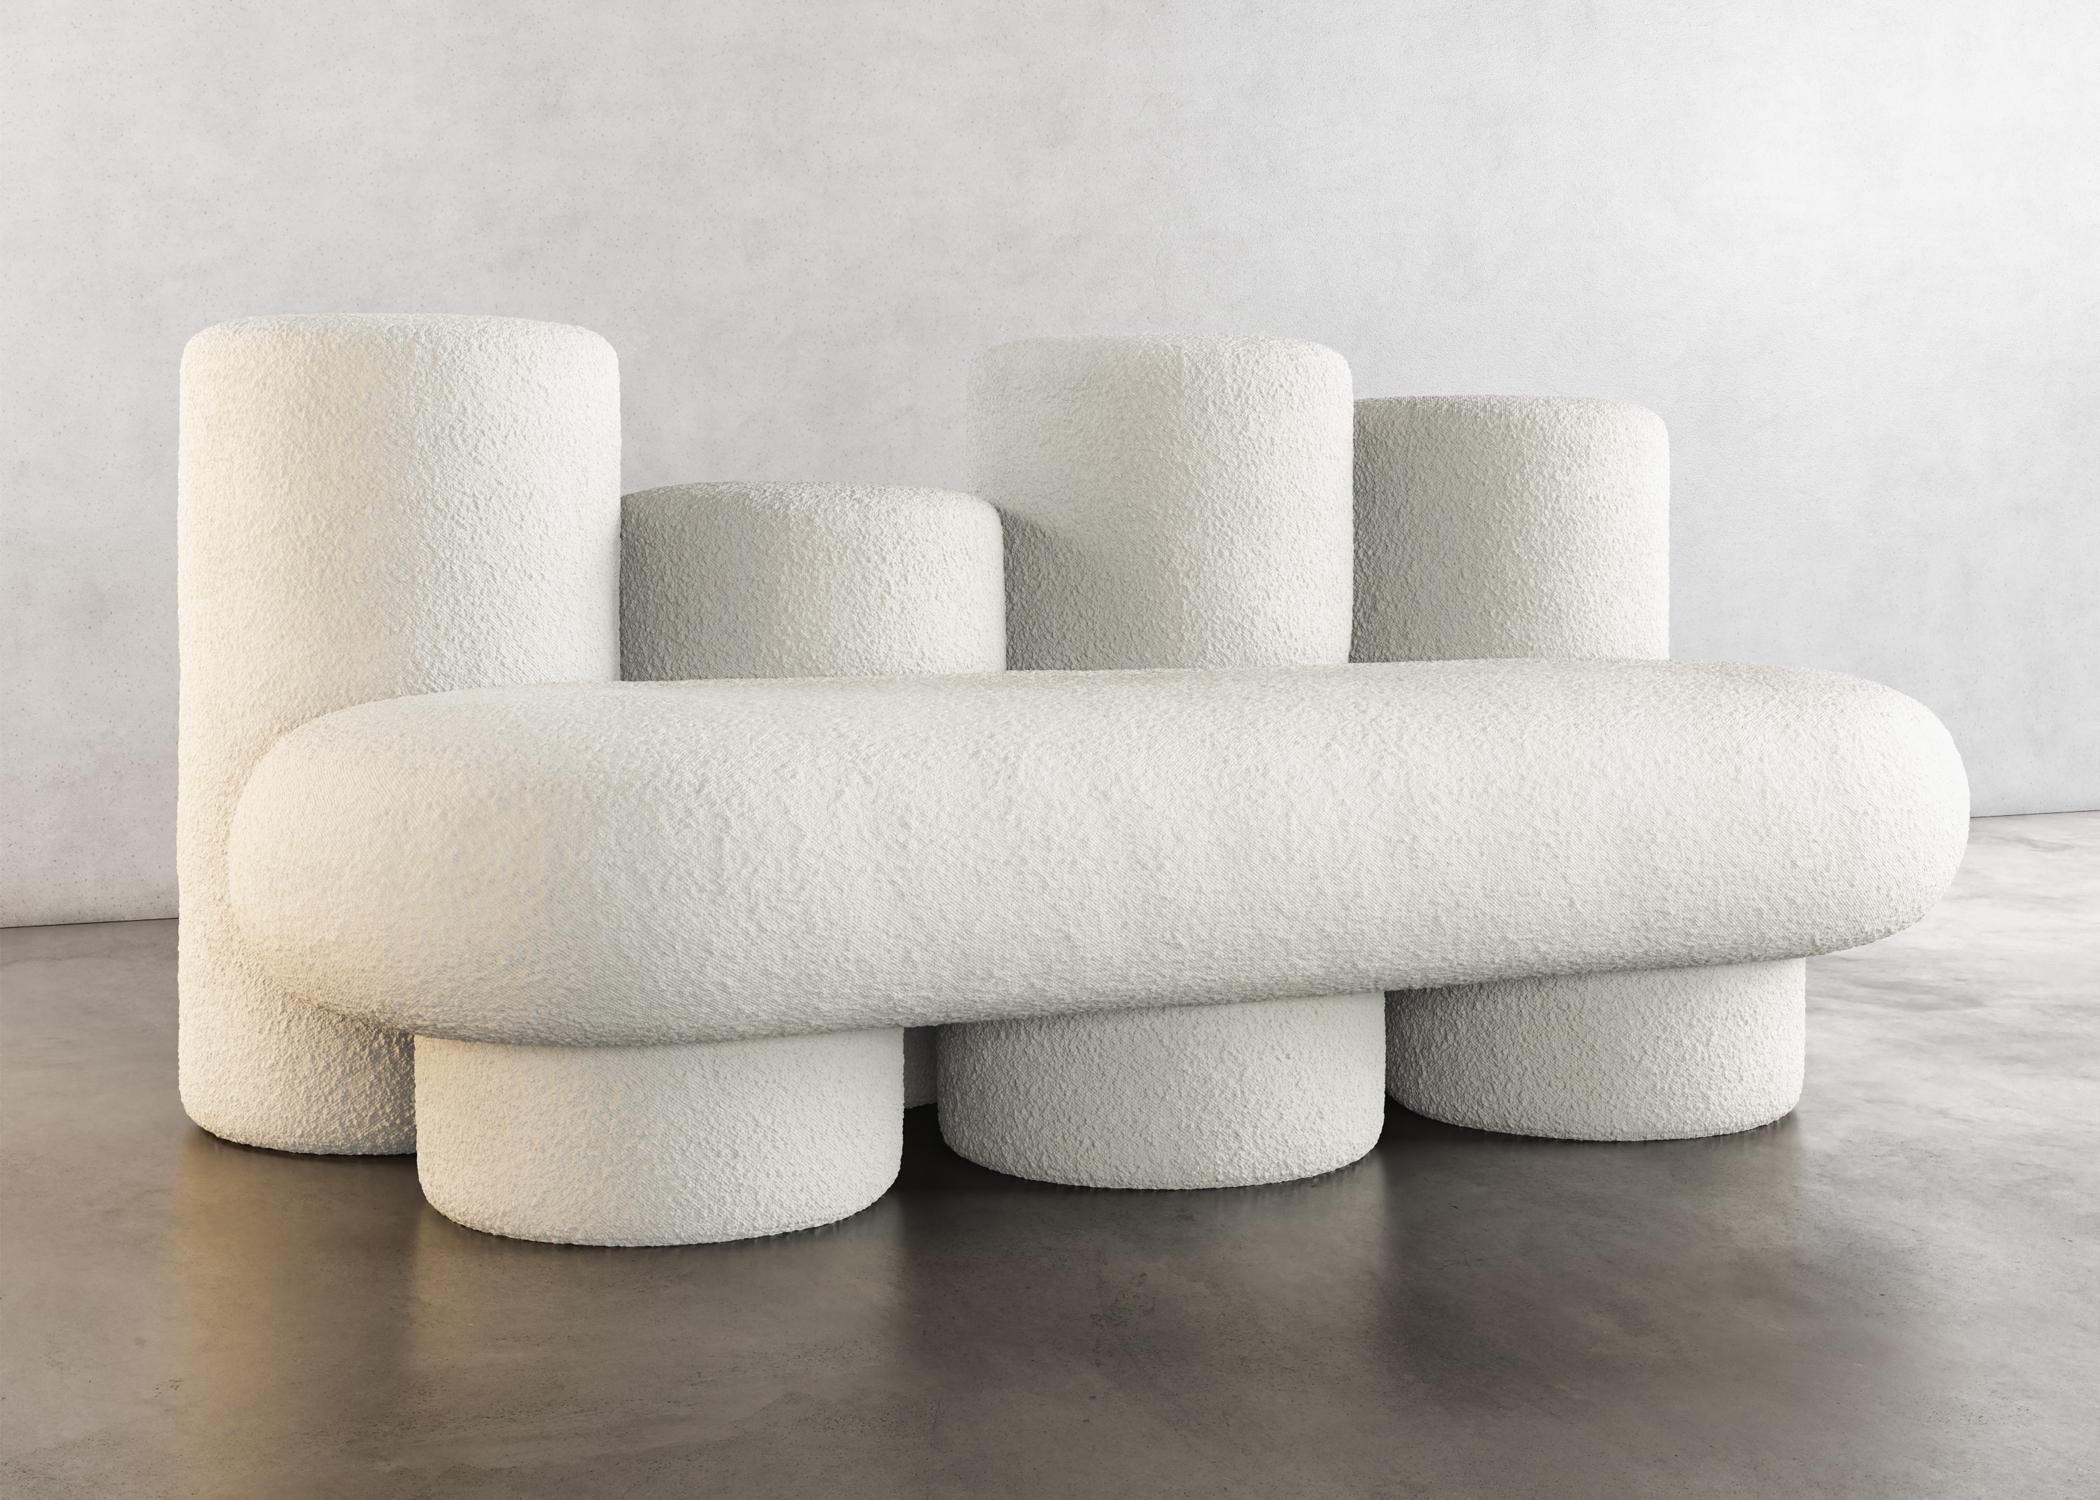 DIP SOFA - Modern Design in Cream Nubby Bouclé

Introducing our iconic Dip Sofa, a modern cream-nubby boucle sofa - the perfect addition to any contemporary living room, bedroom, or office space.

Crafted with a sturdy all-wood frame and wrapped in